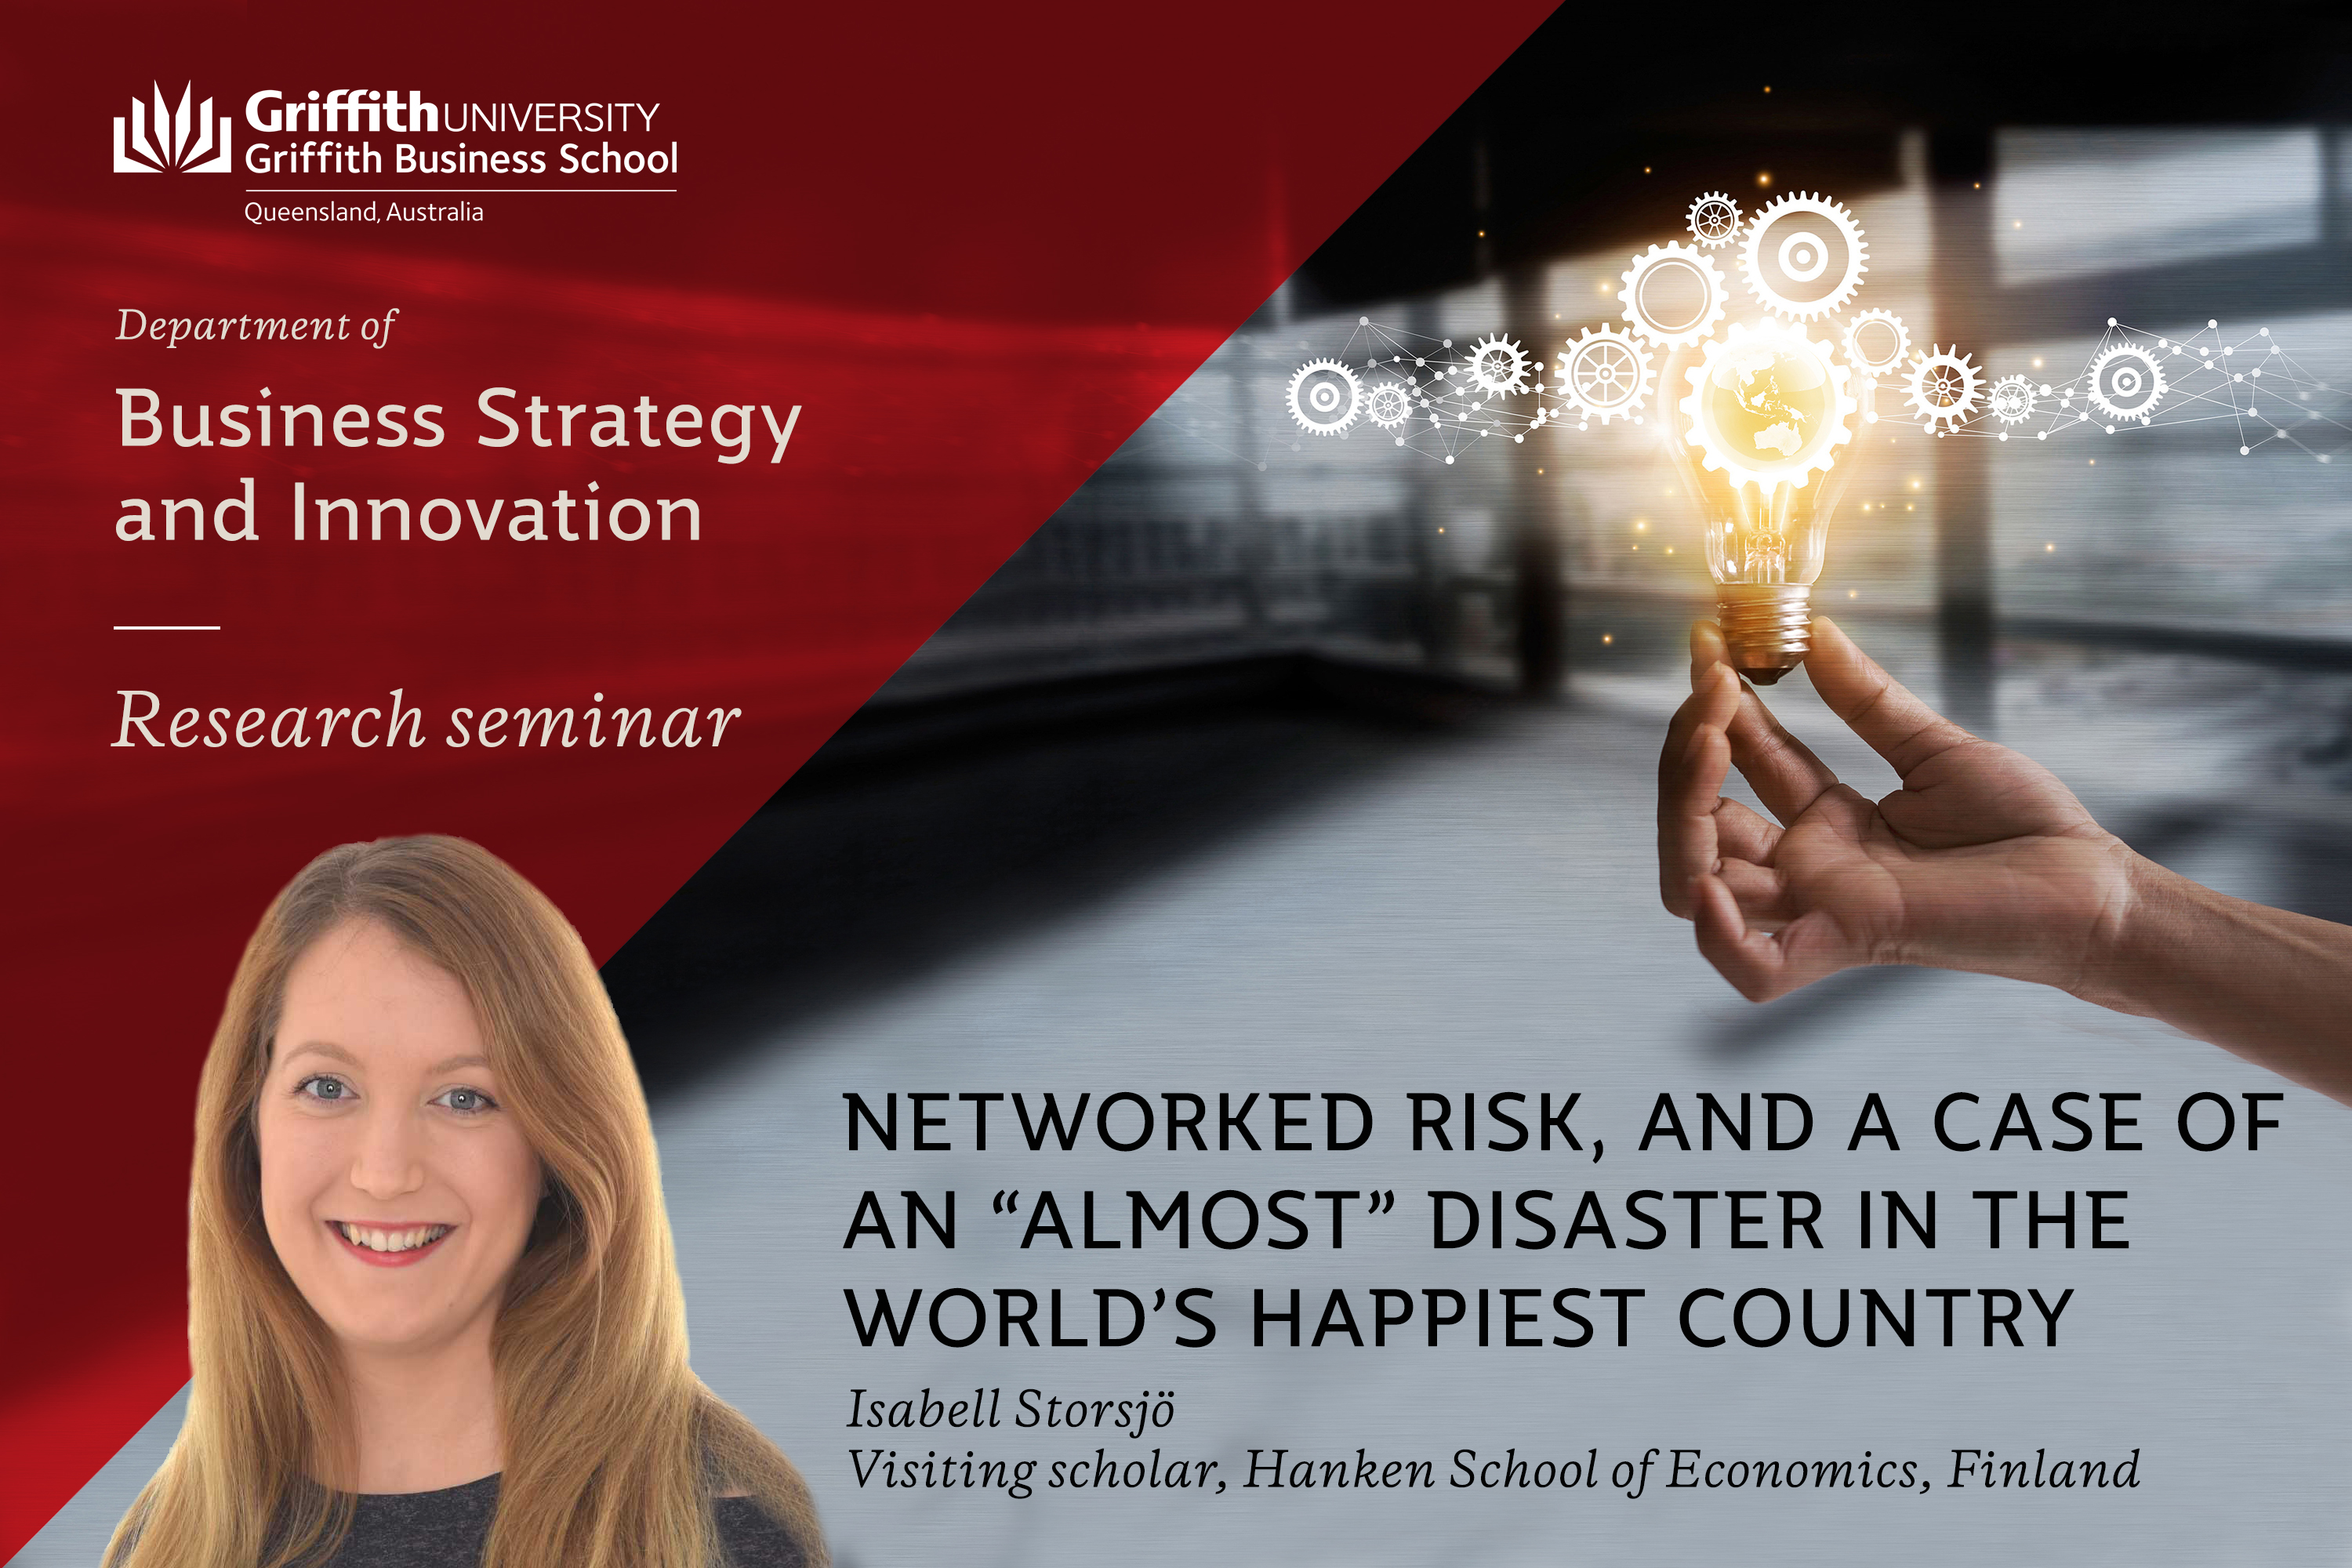 BSI Research Seminar: Networked risk, and a case of an "almost" disaster in the world's happiest country